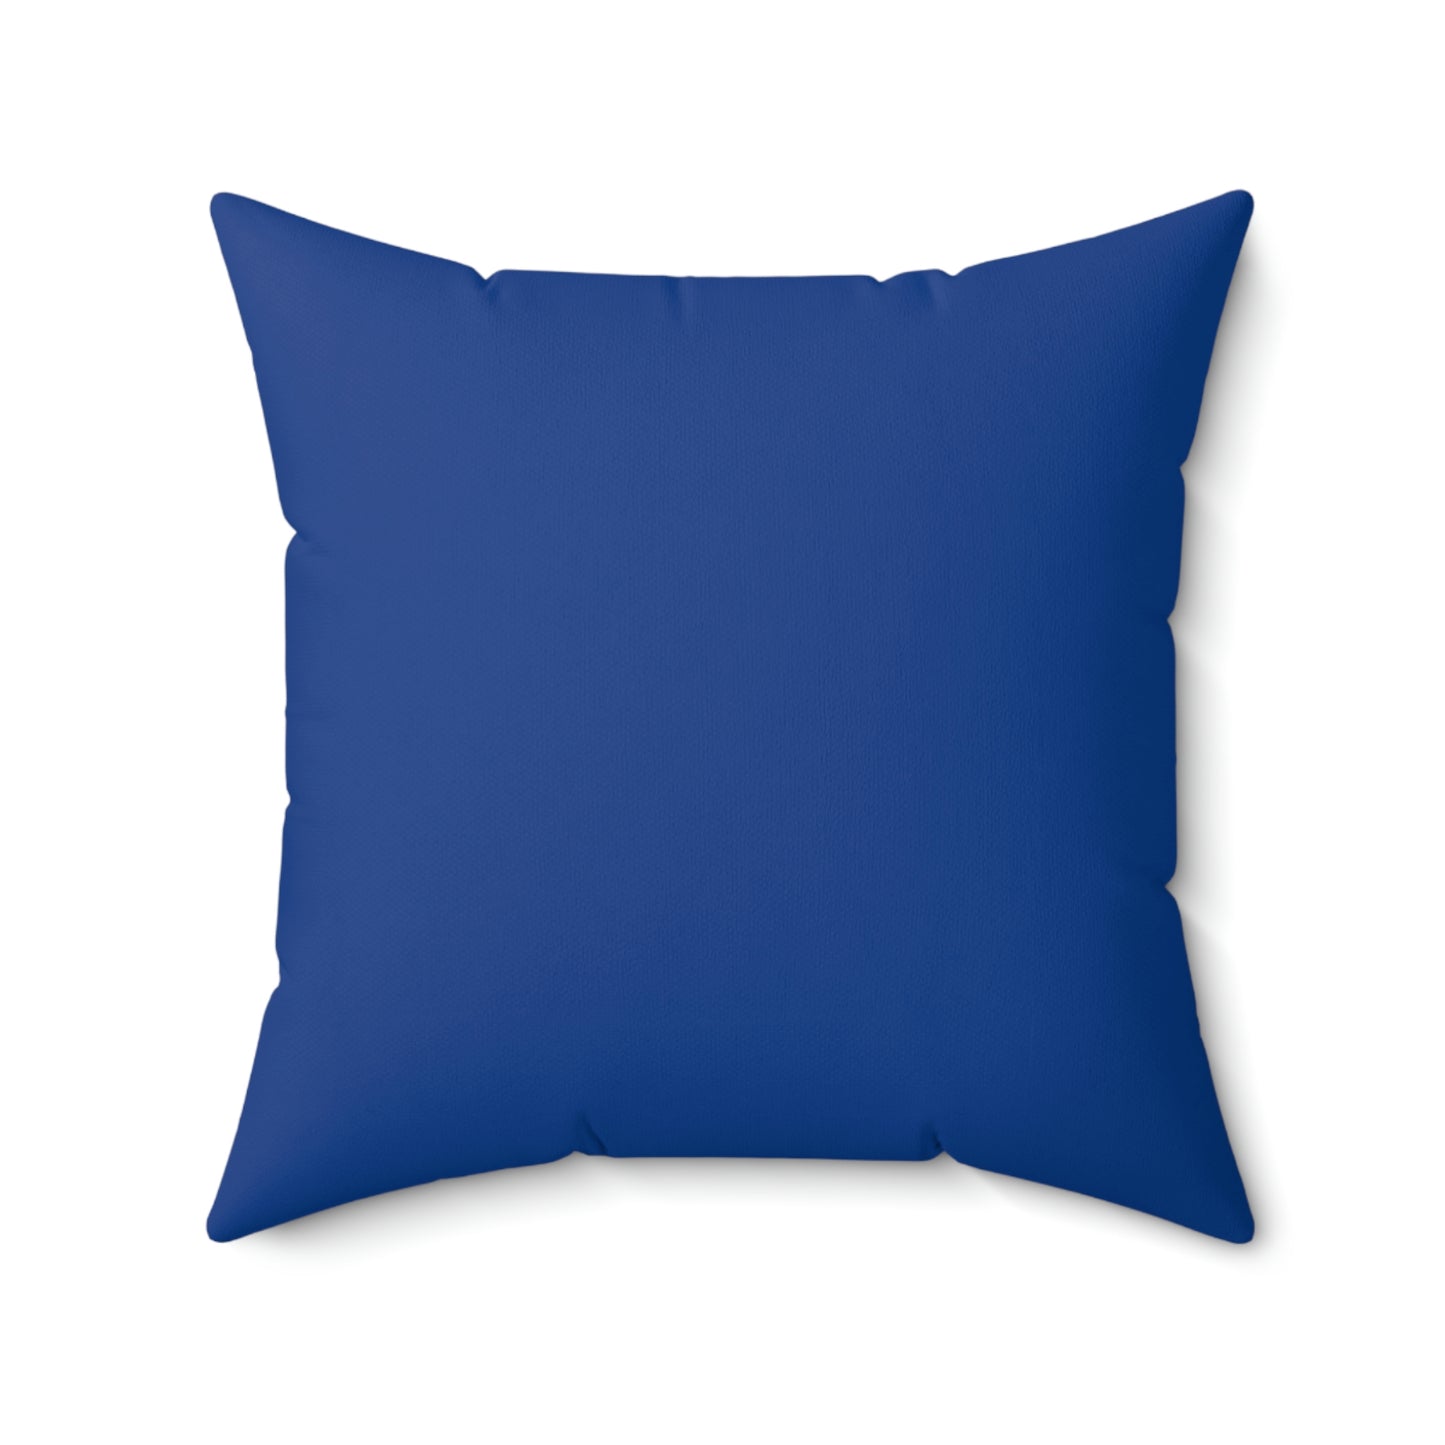 Spun Polyester Square Pillow Case "Number One Dad on Dark Blue”